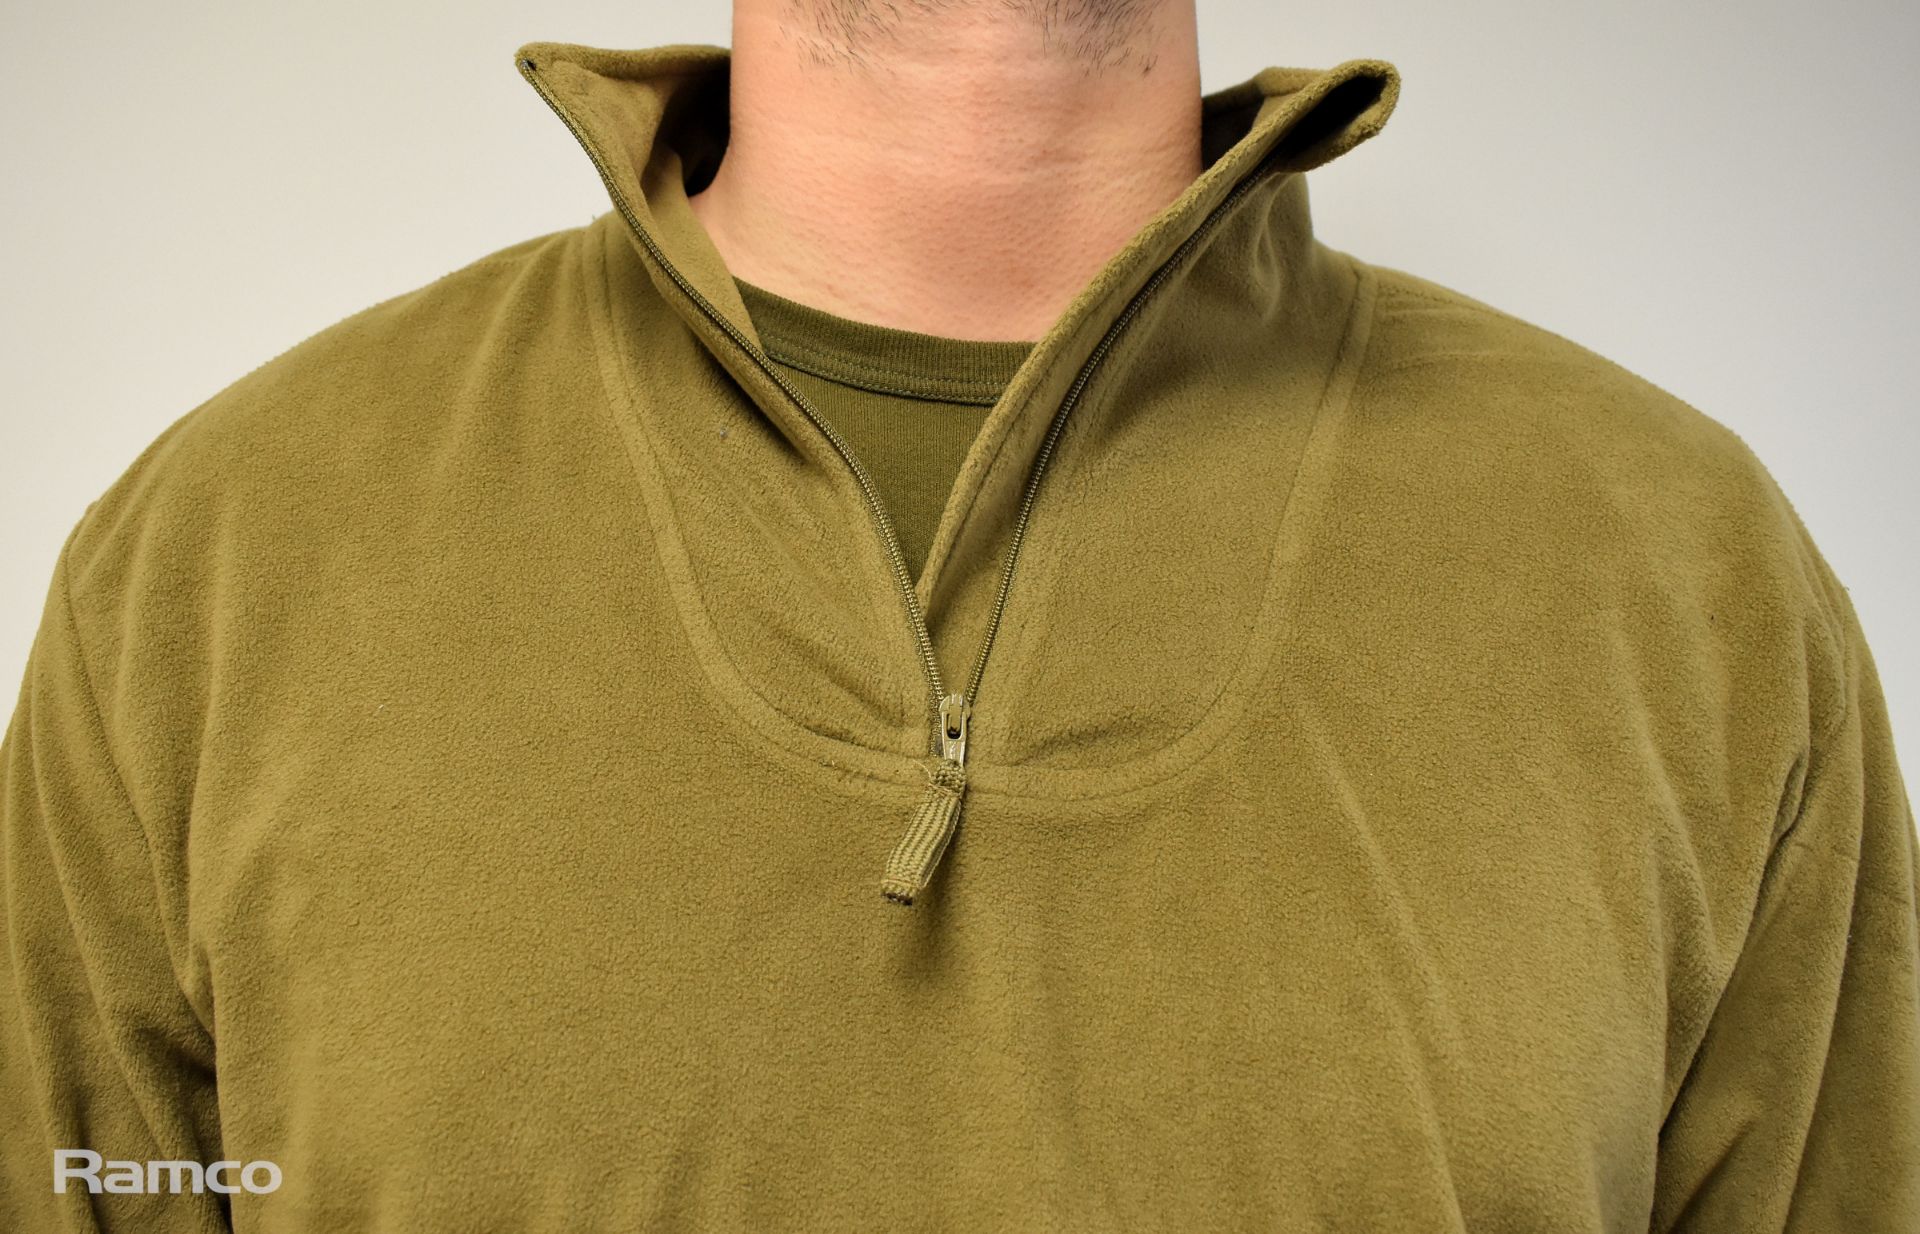 130x British Army Combat thermal undershirts - mixed colours - mixed grades and sizes - Image 5 of 10